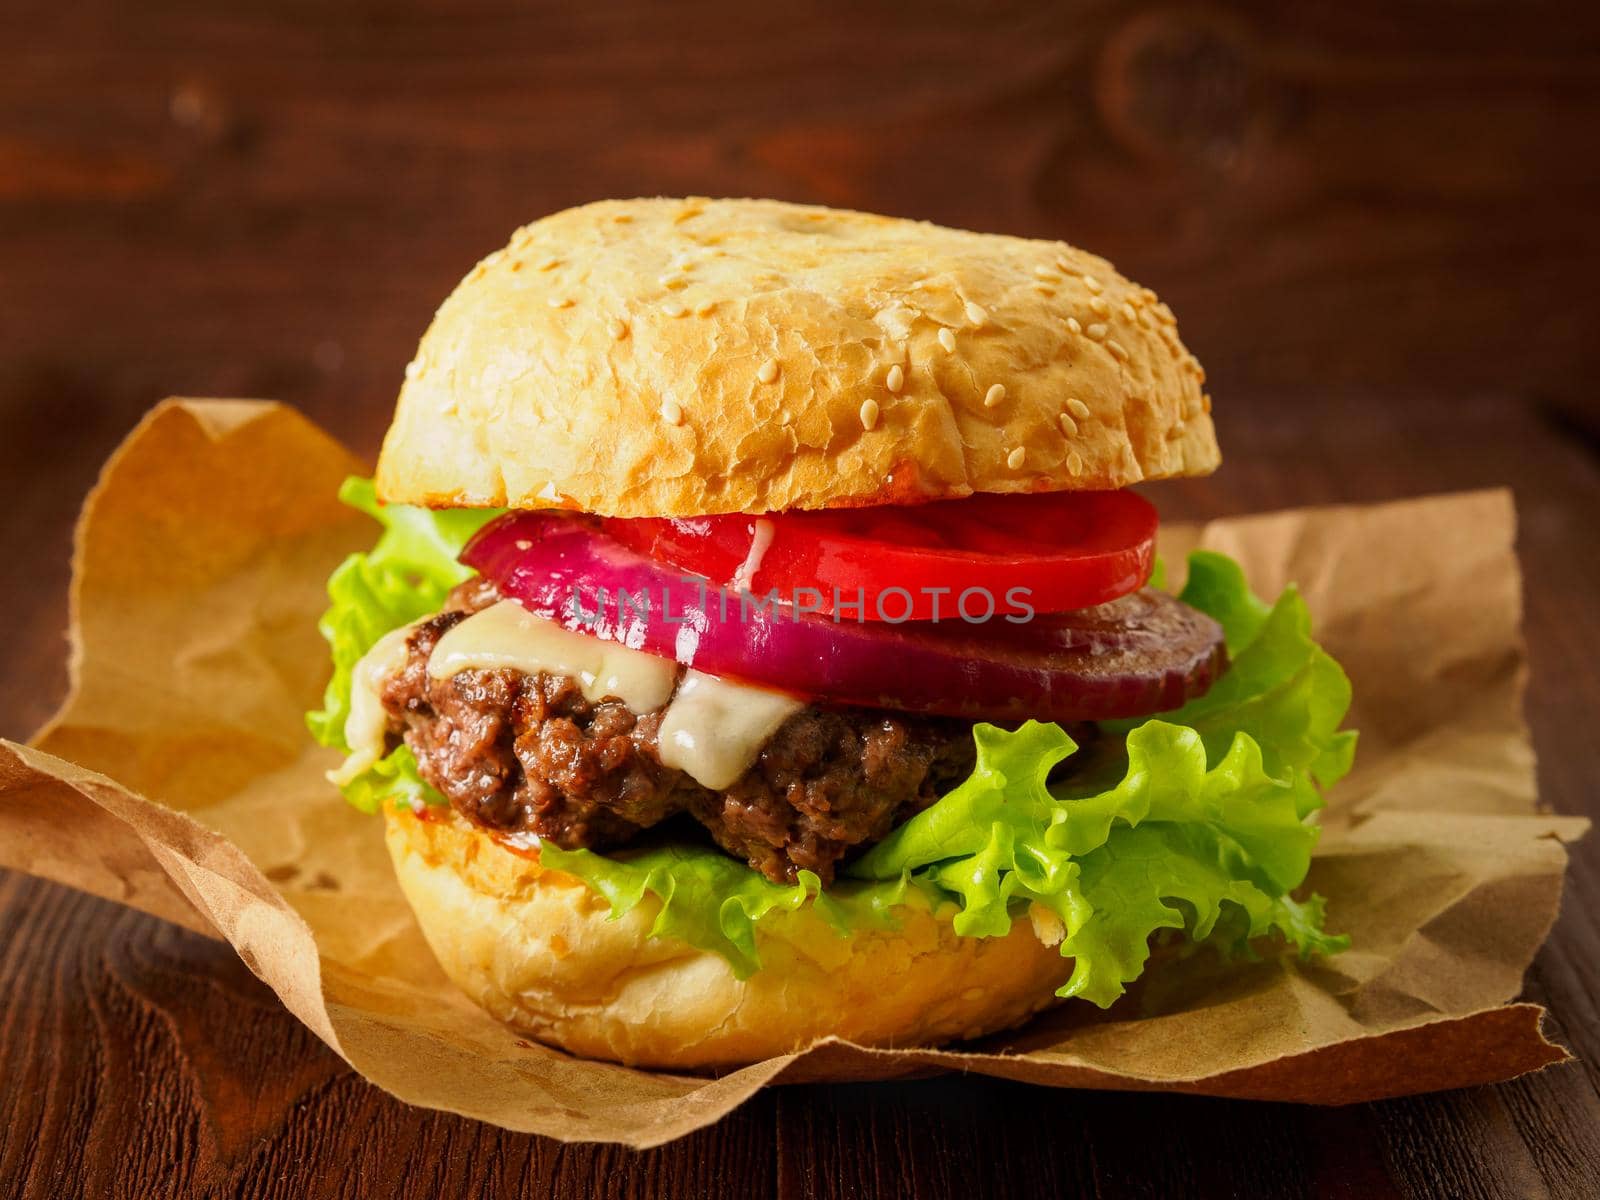 Big delicious homemade burger with beef cutlet, cheese, onion, tomato and lettuce on toasted rolls. American fast food, unhealthy eating. Side view, selective focus by NataBene